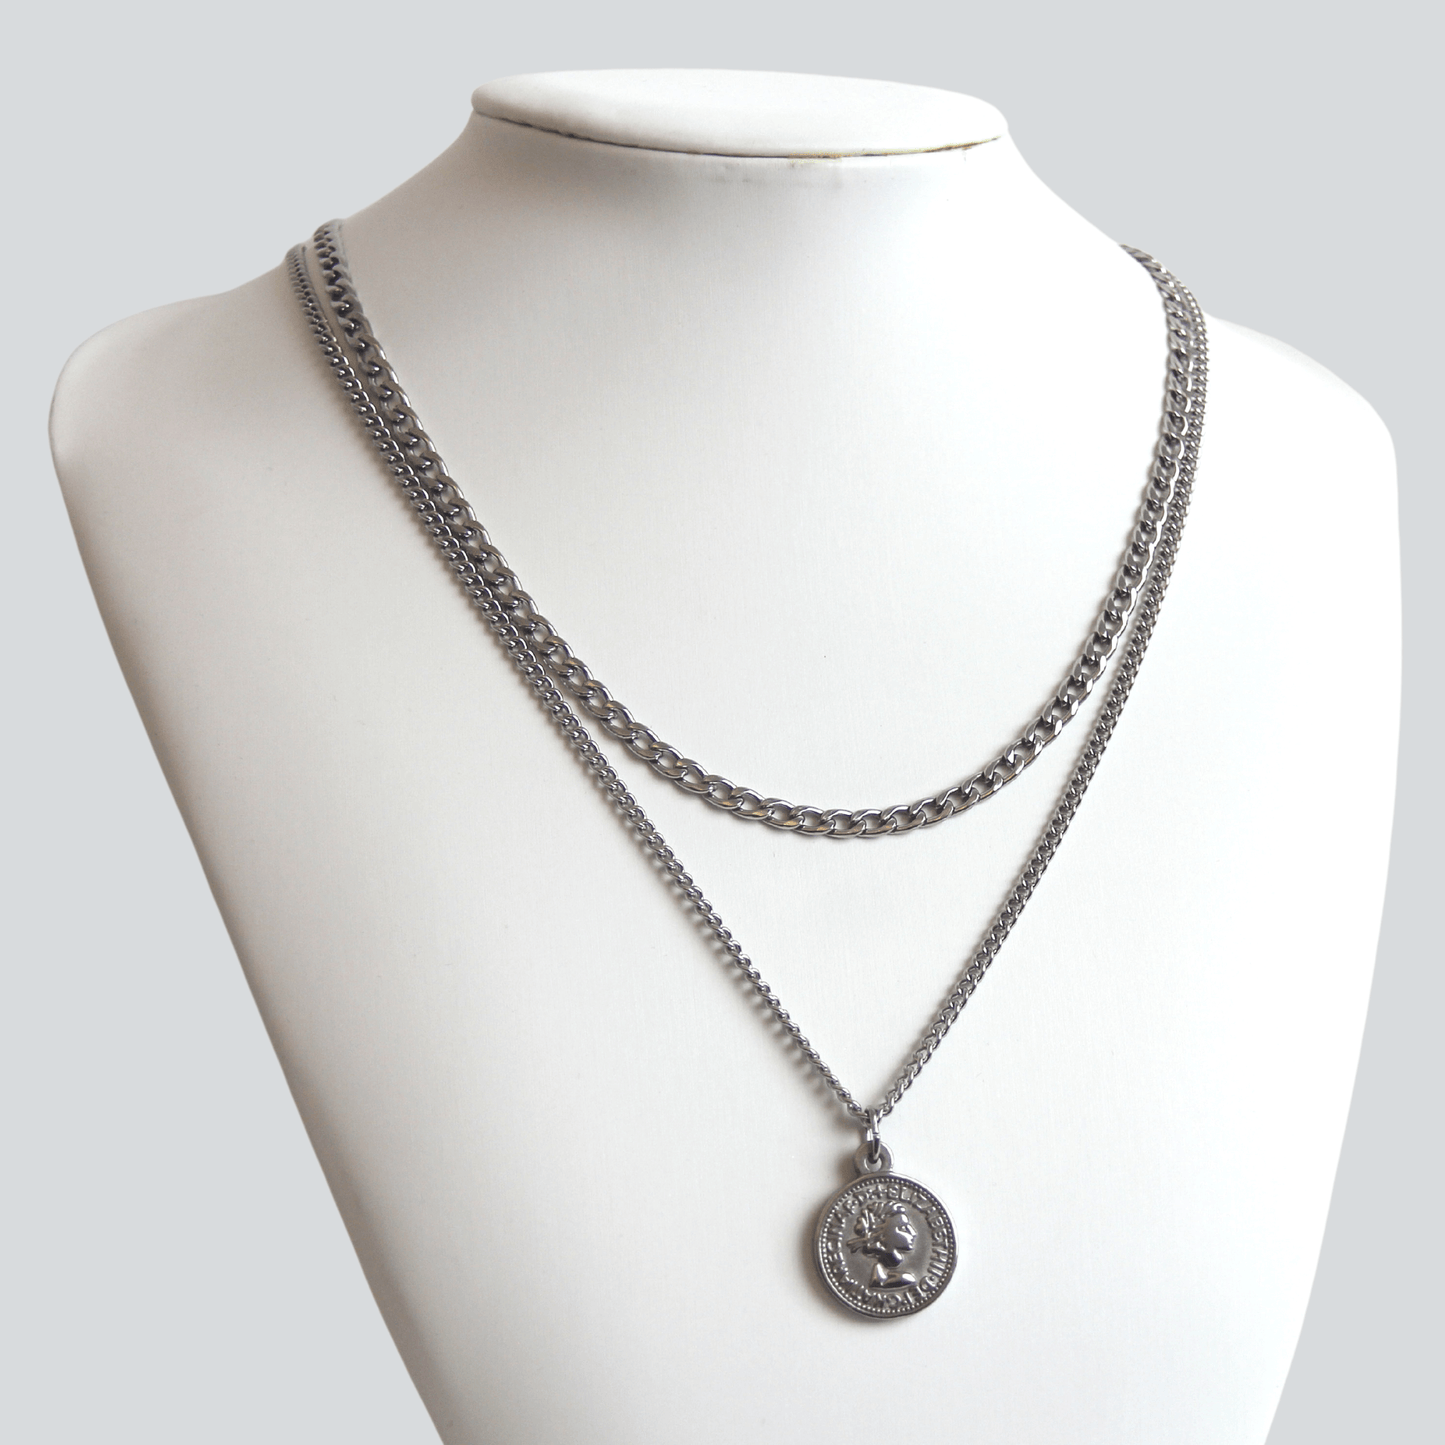 Silver Necklace Set for Men : Coin Pendant Necklace and 4mm Curb Chain - Necklace Set -  Boutique Wear RENN